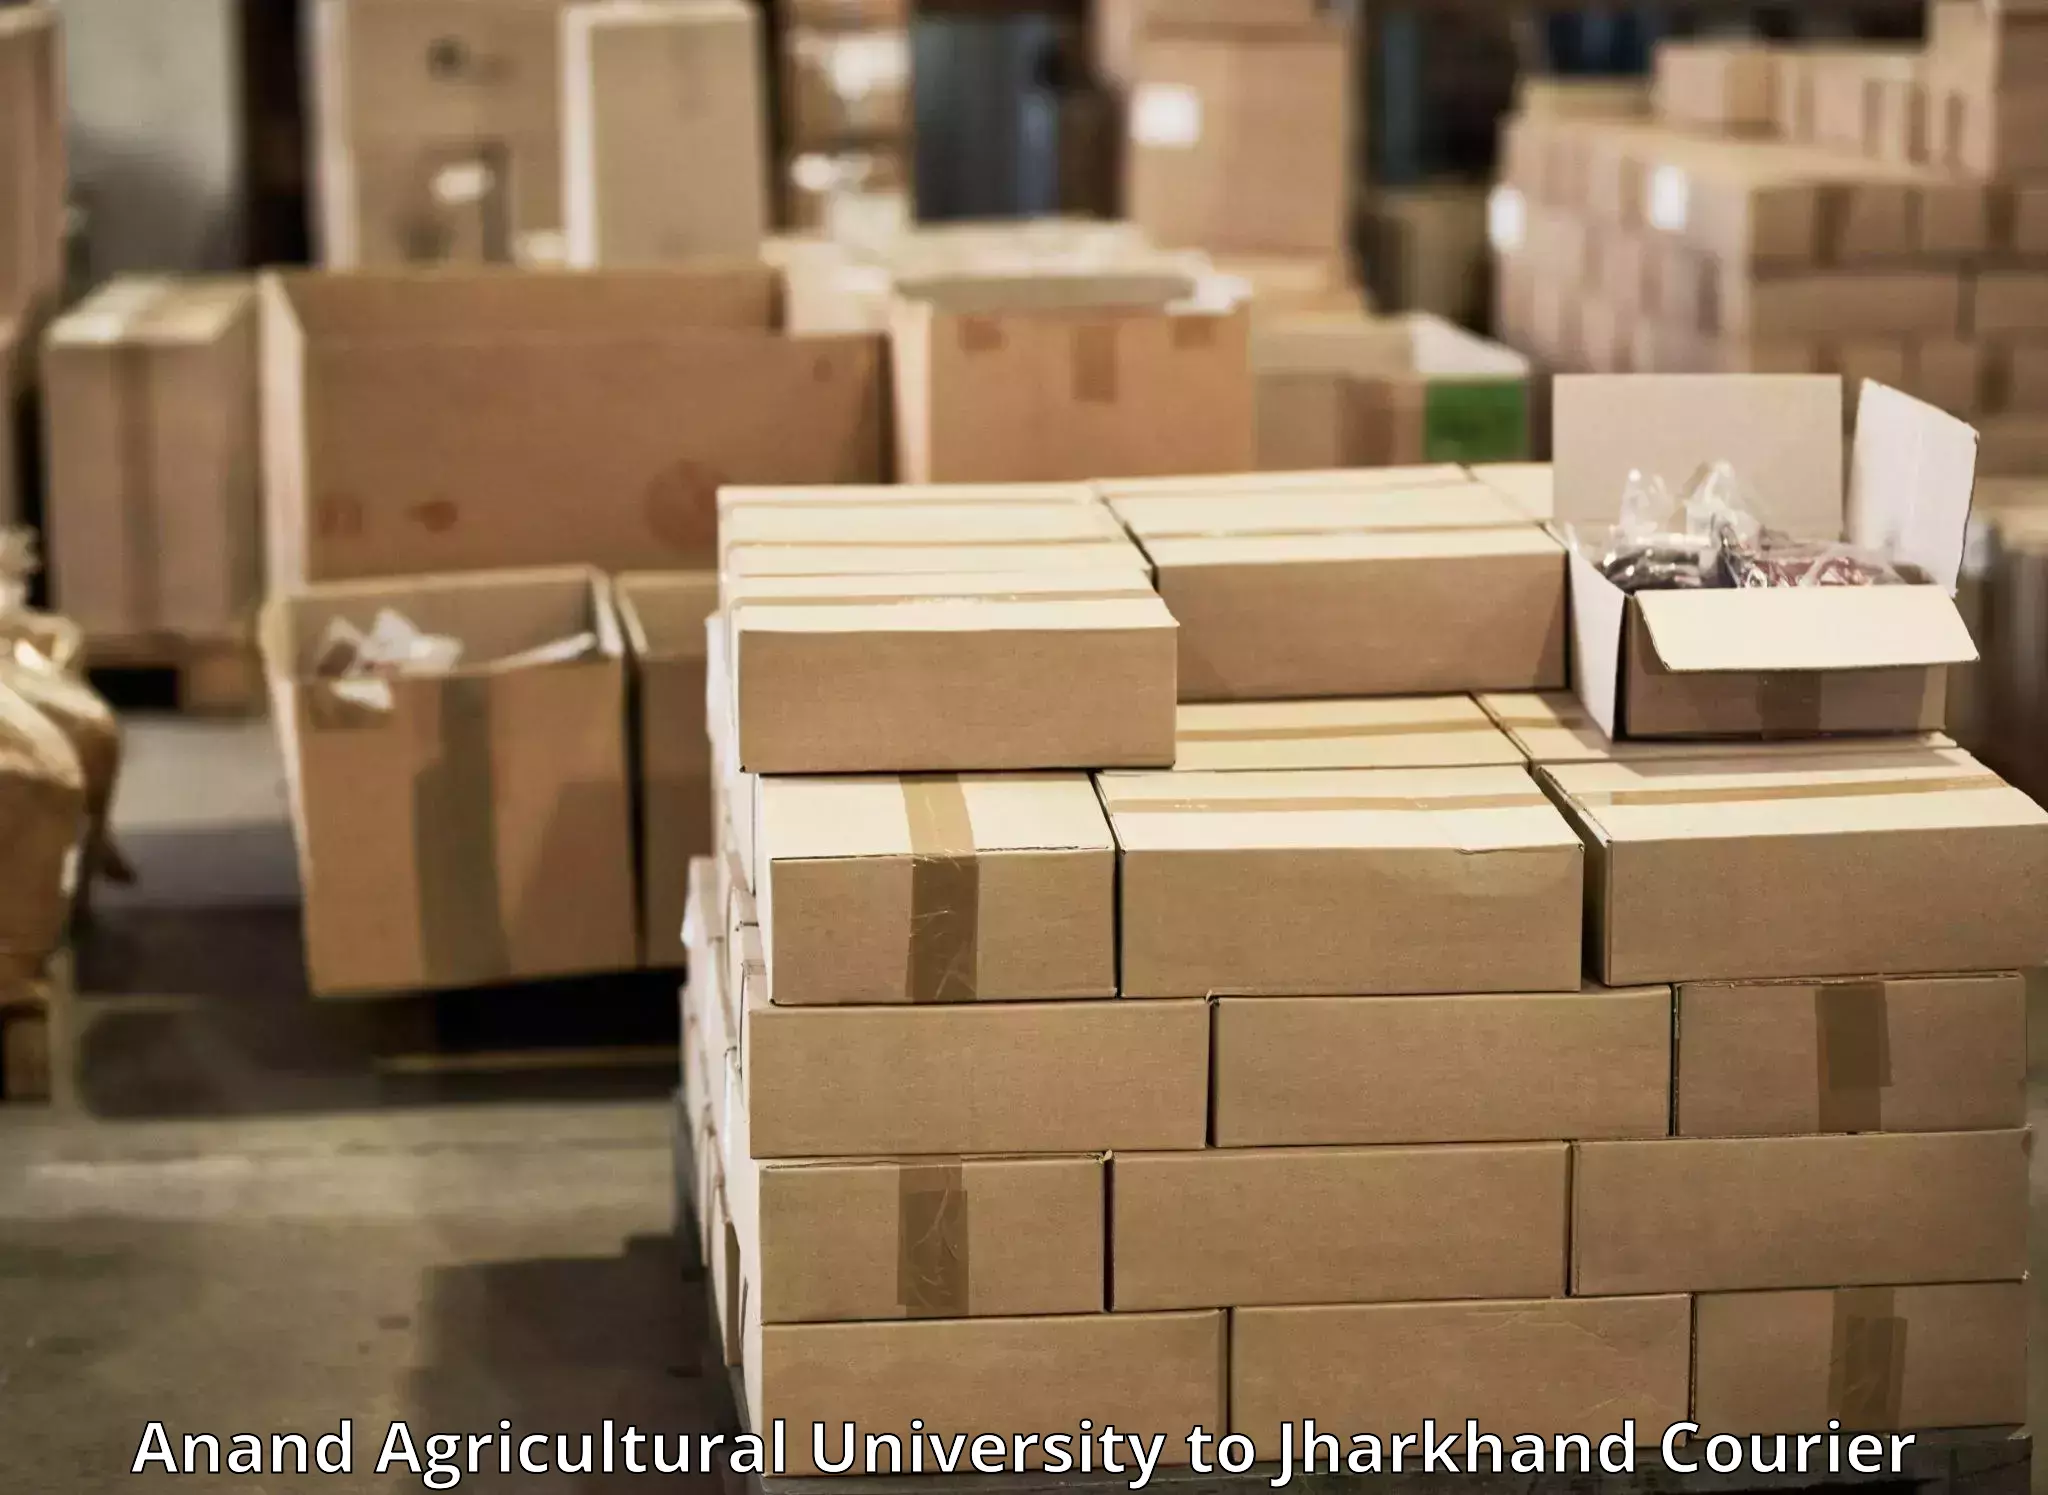 Nationwide shipping coverage Anand Agricultural University to Isri